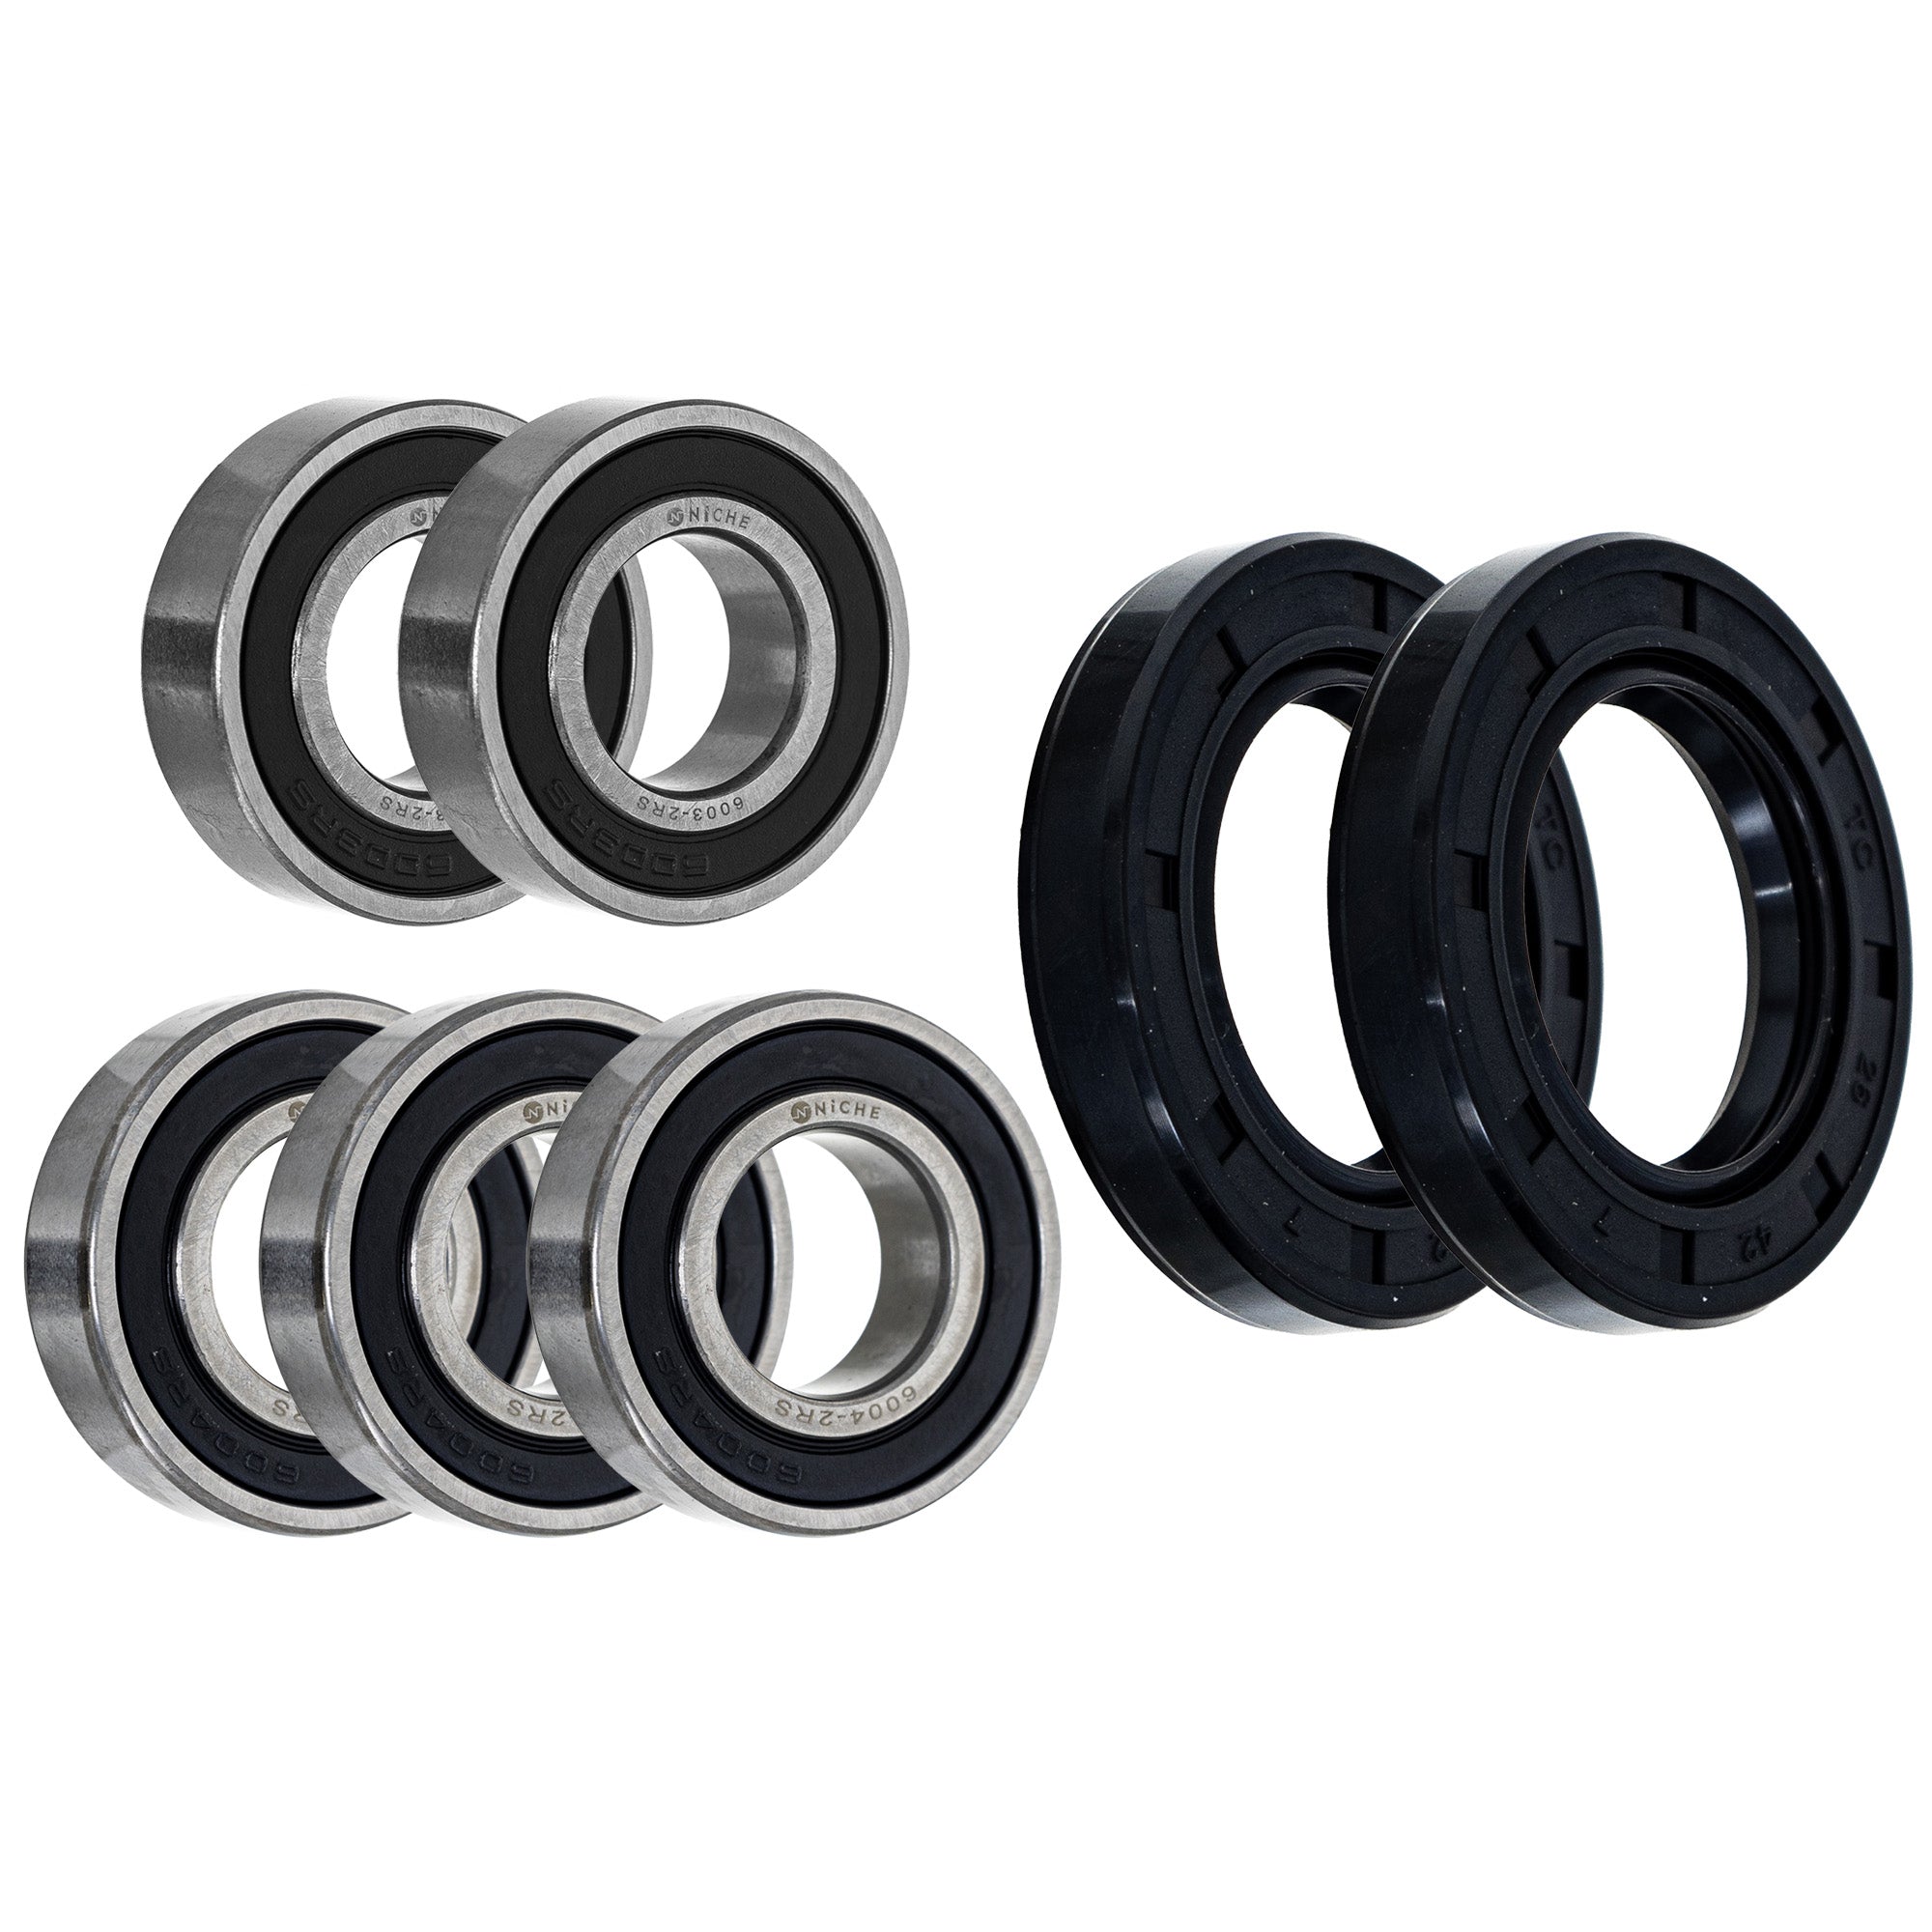 Wheel Bearing Seal Kit for zOTHER Ref No RM250 RM125 NICHE MK1008741